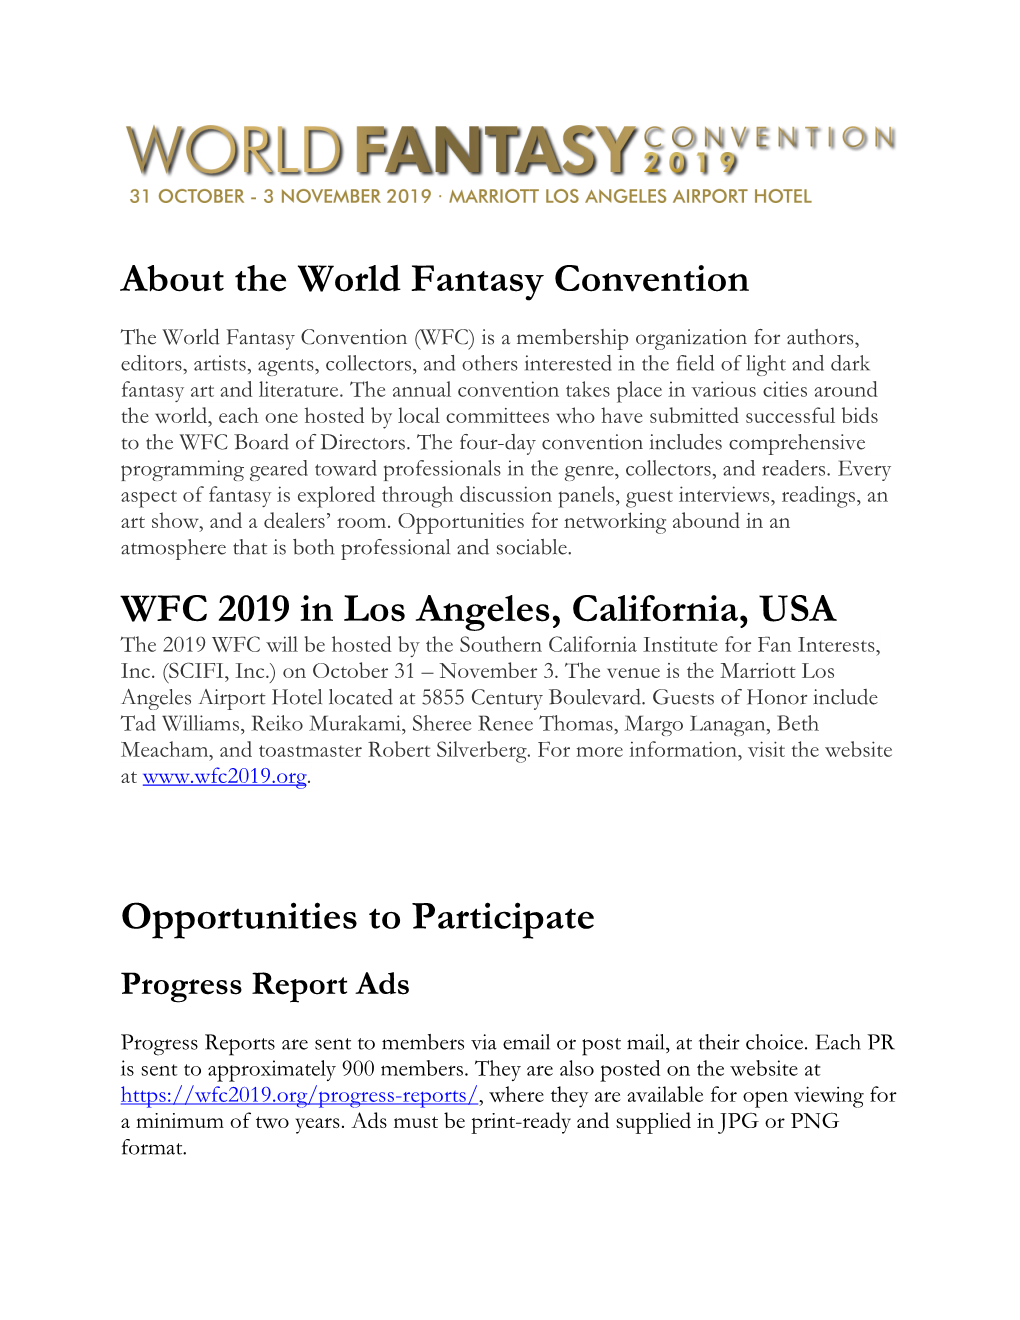 WFC 2019 Promotional Packet